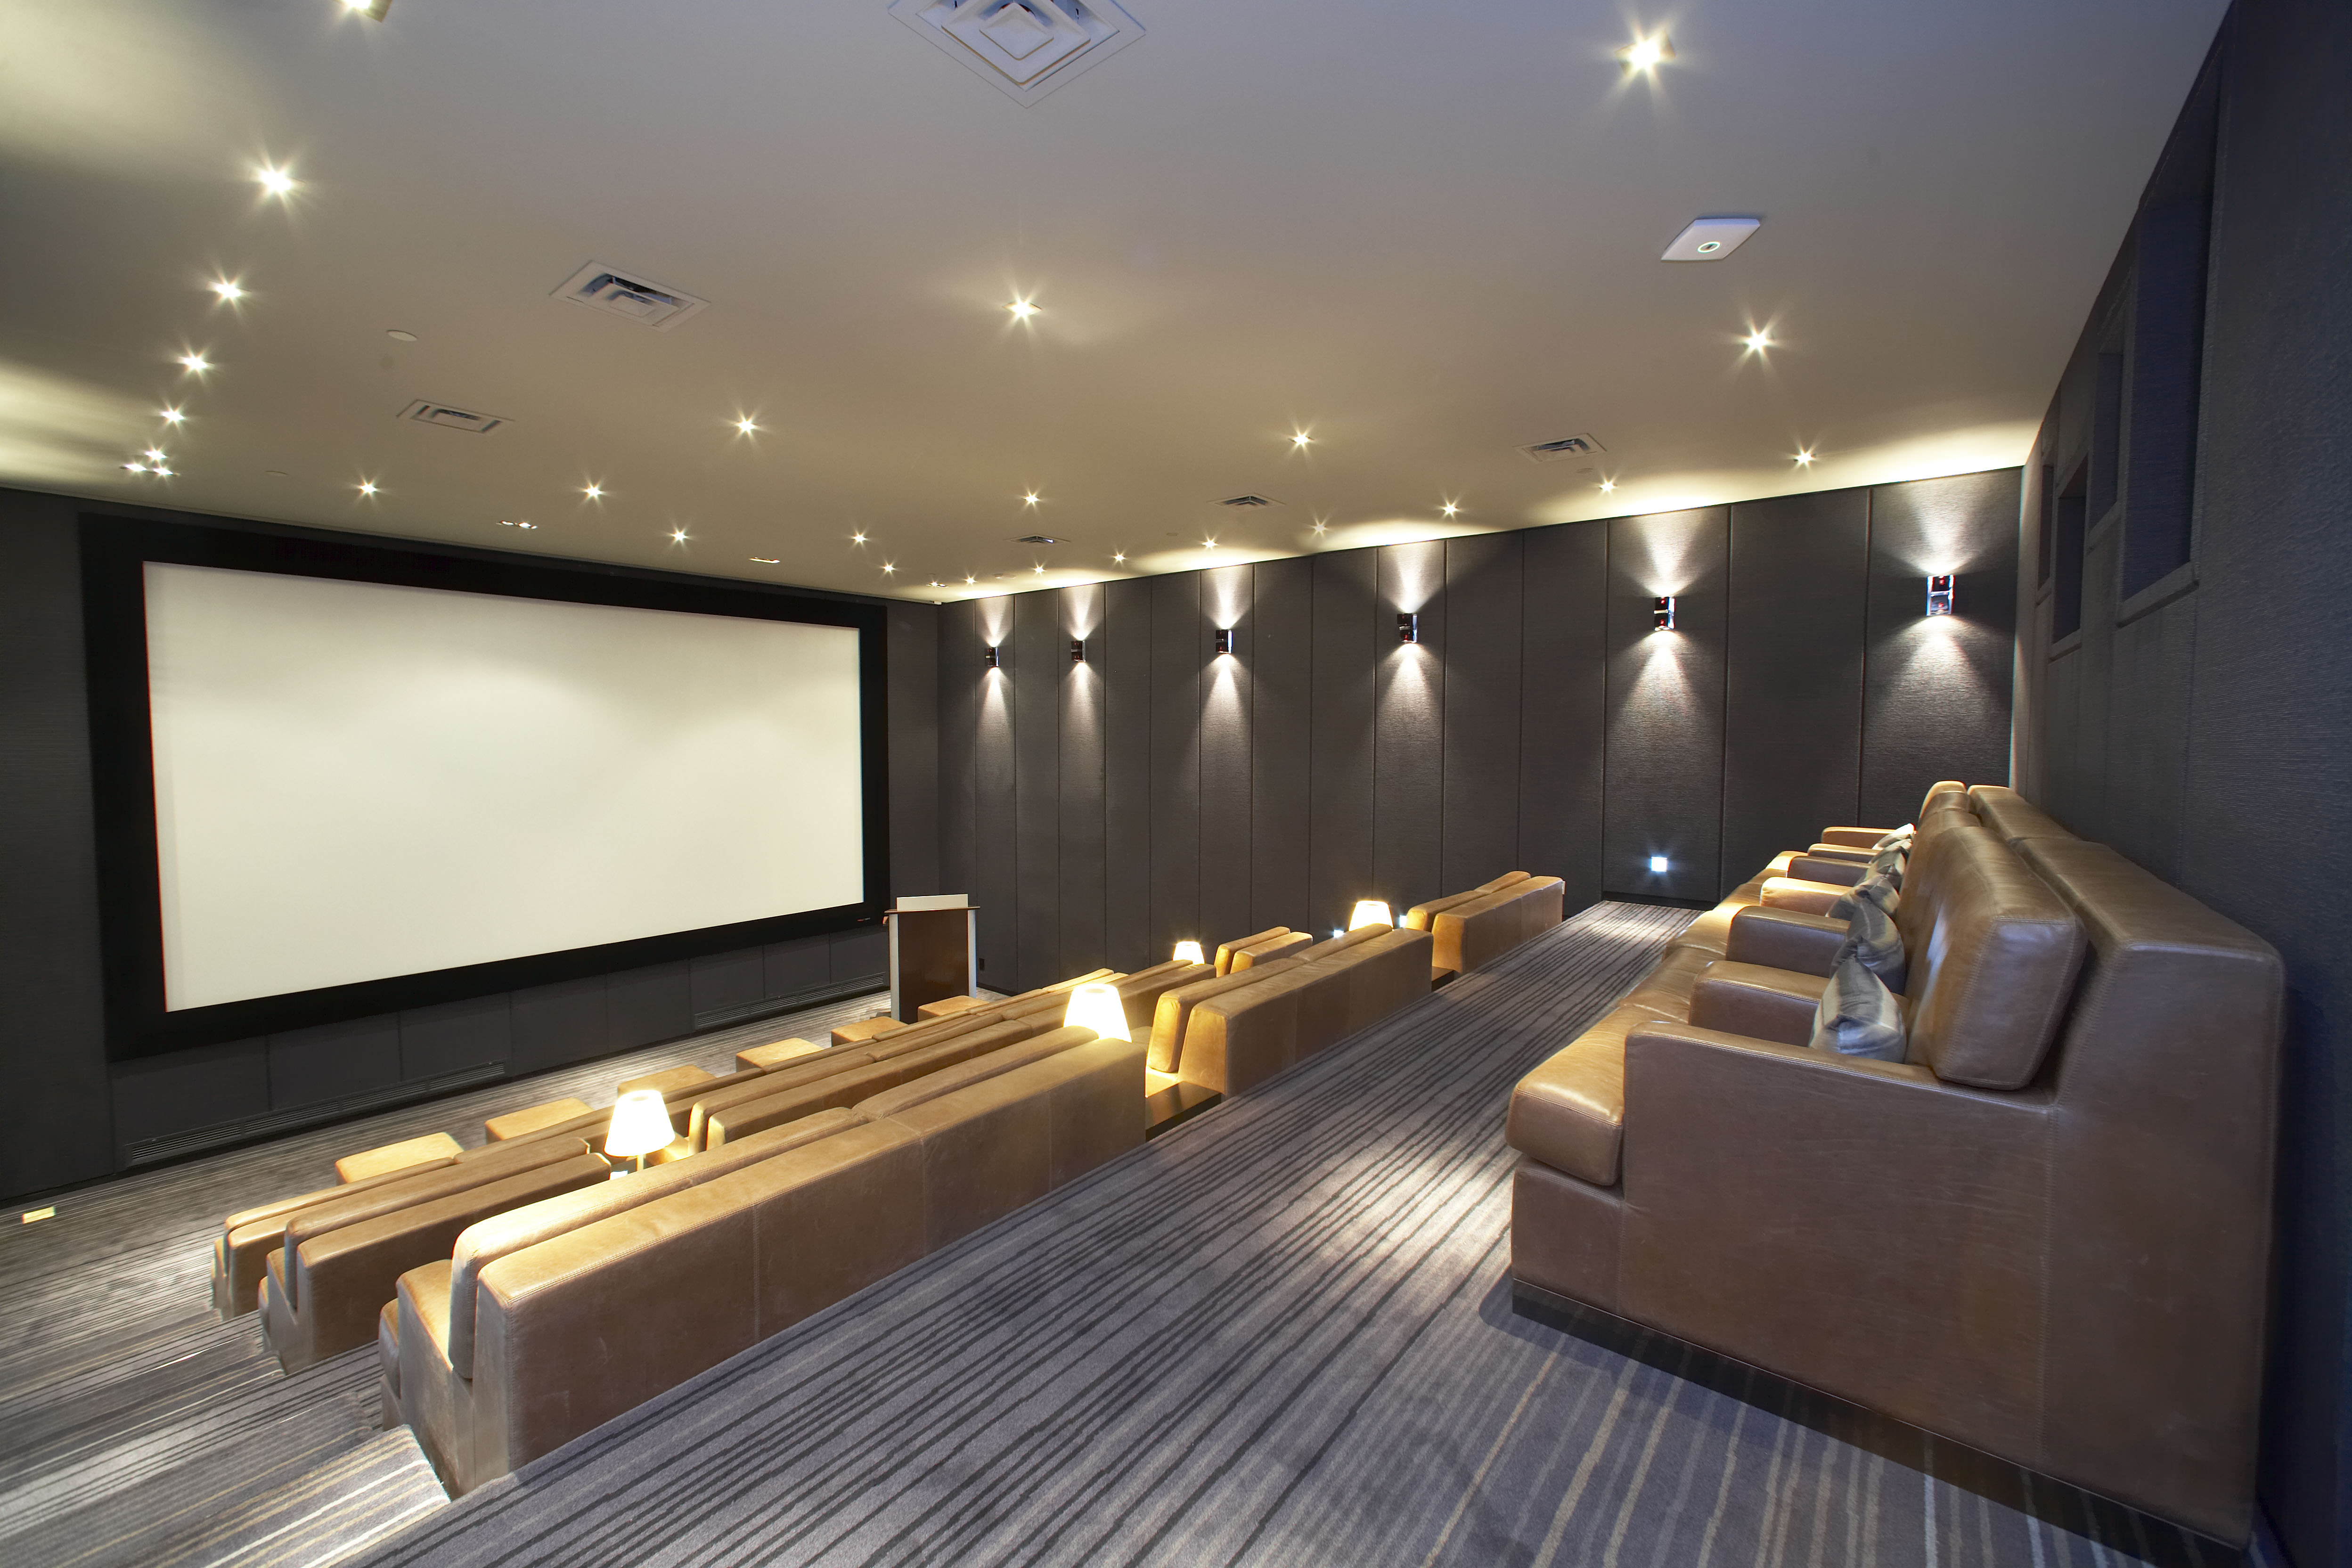 The Silver Screening Room